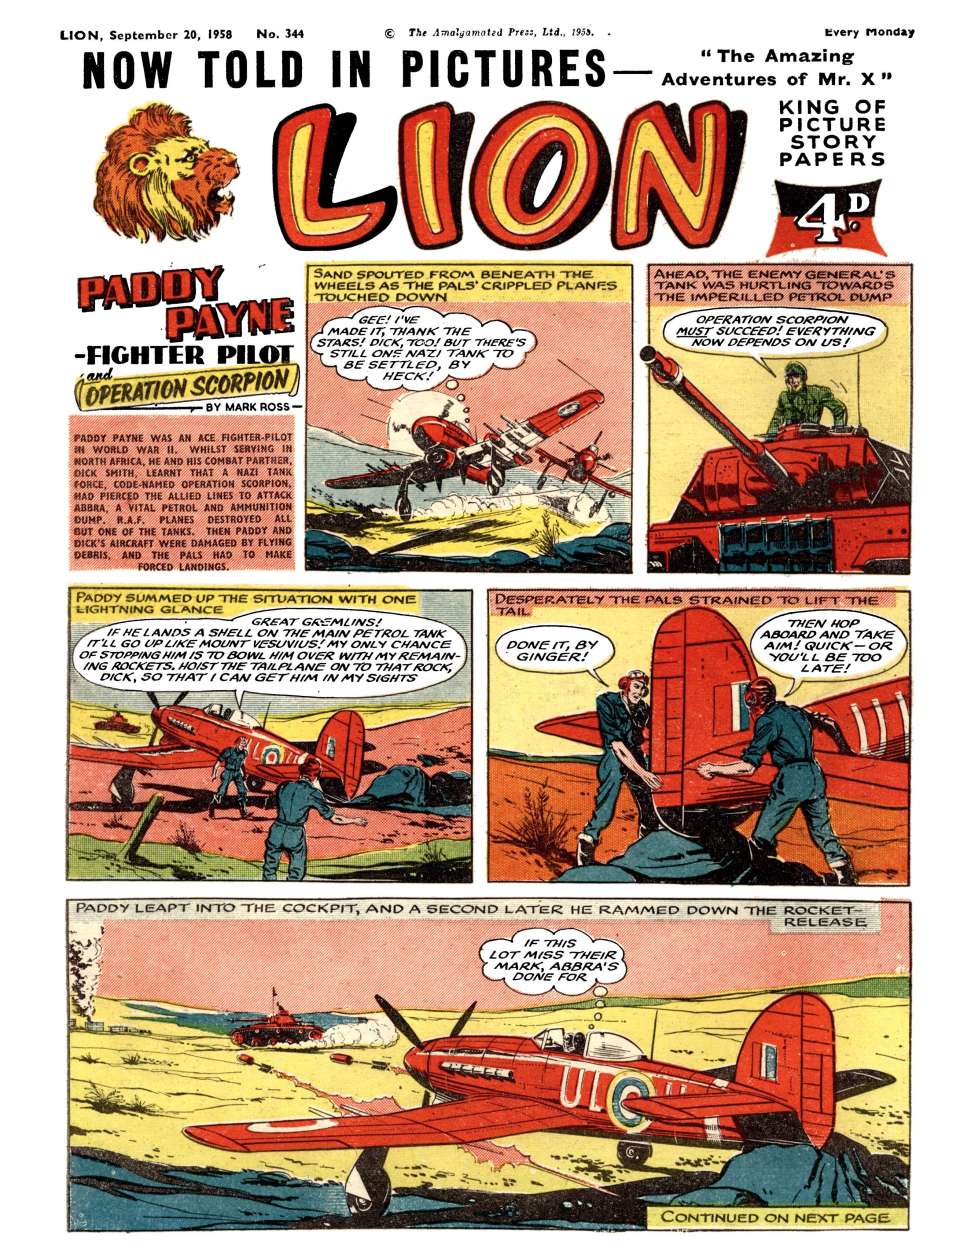 Book Cover For Lion 344